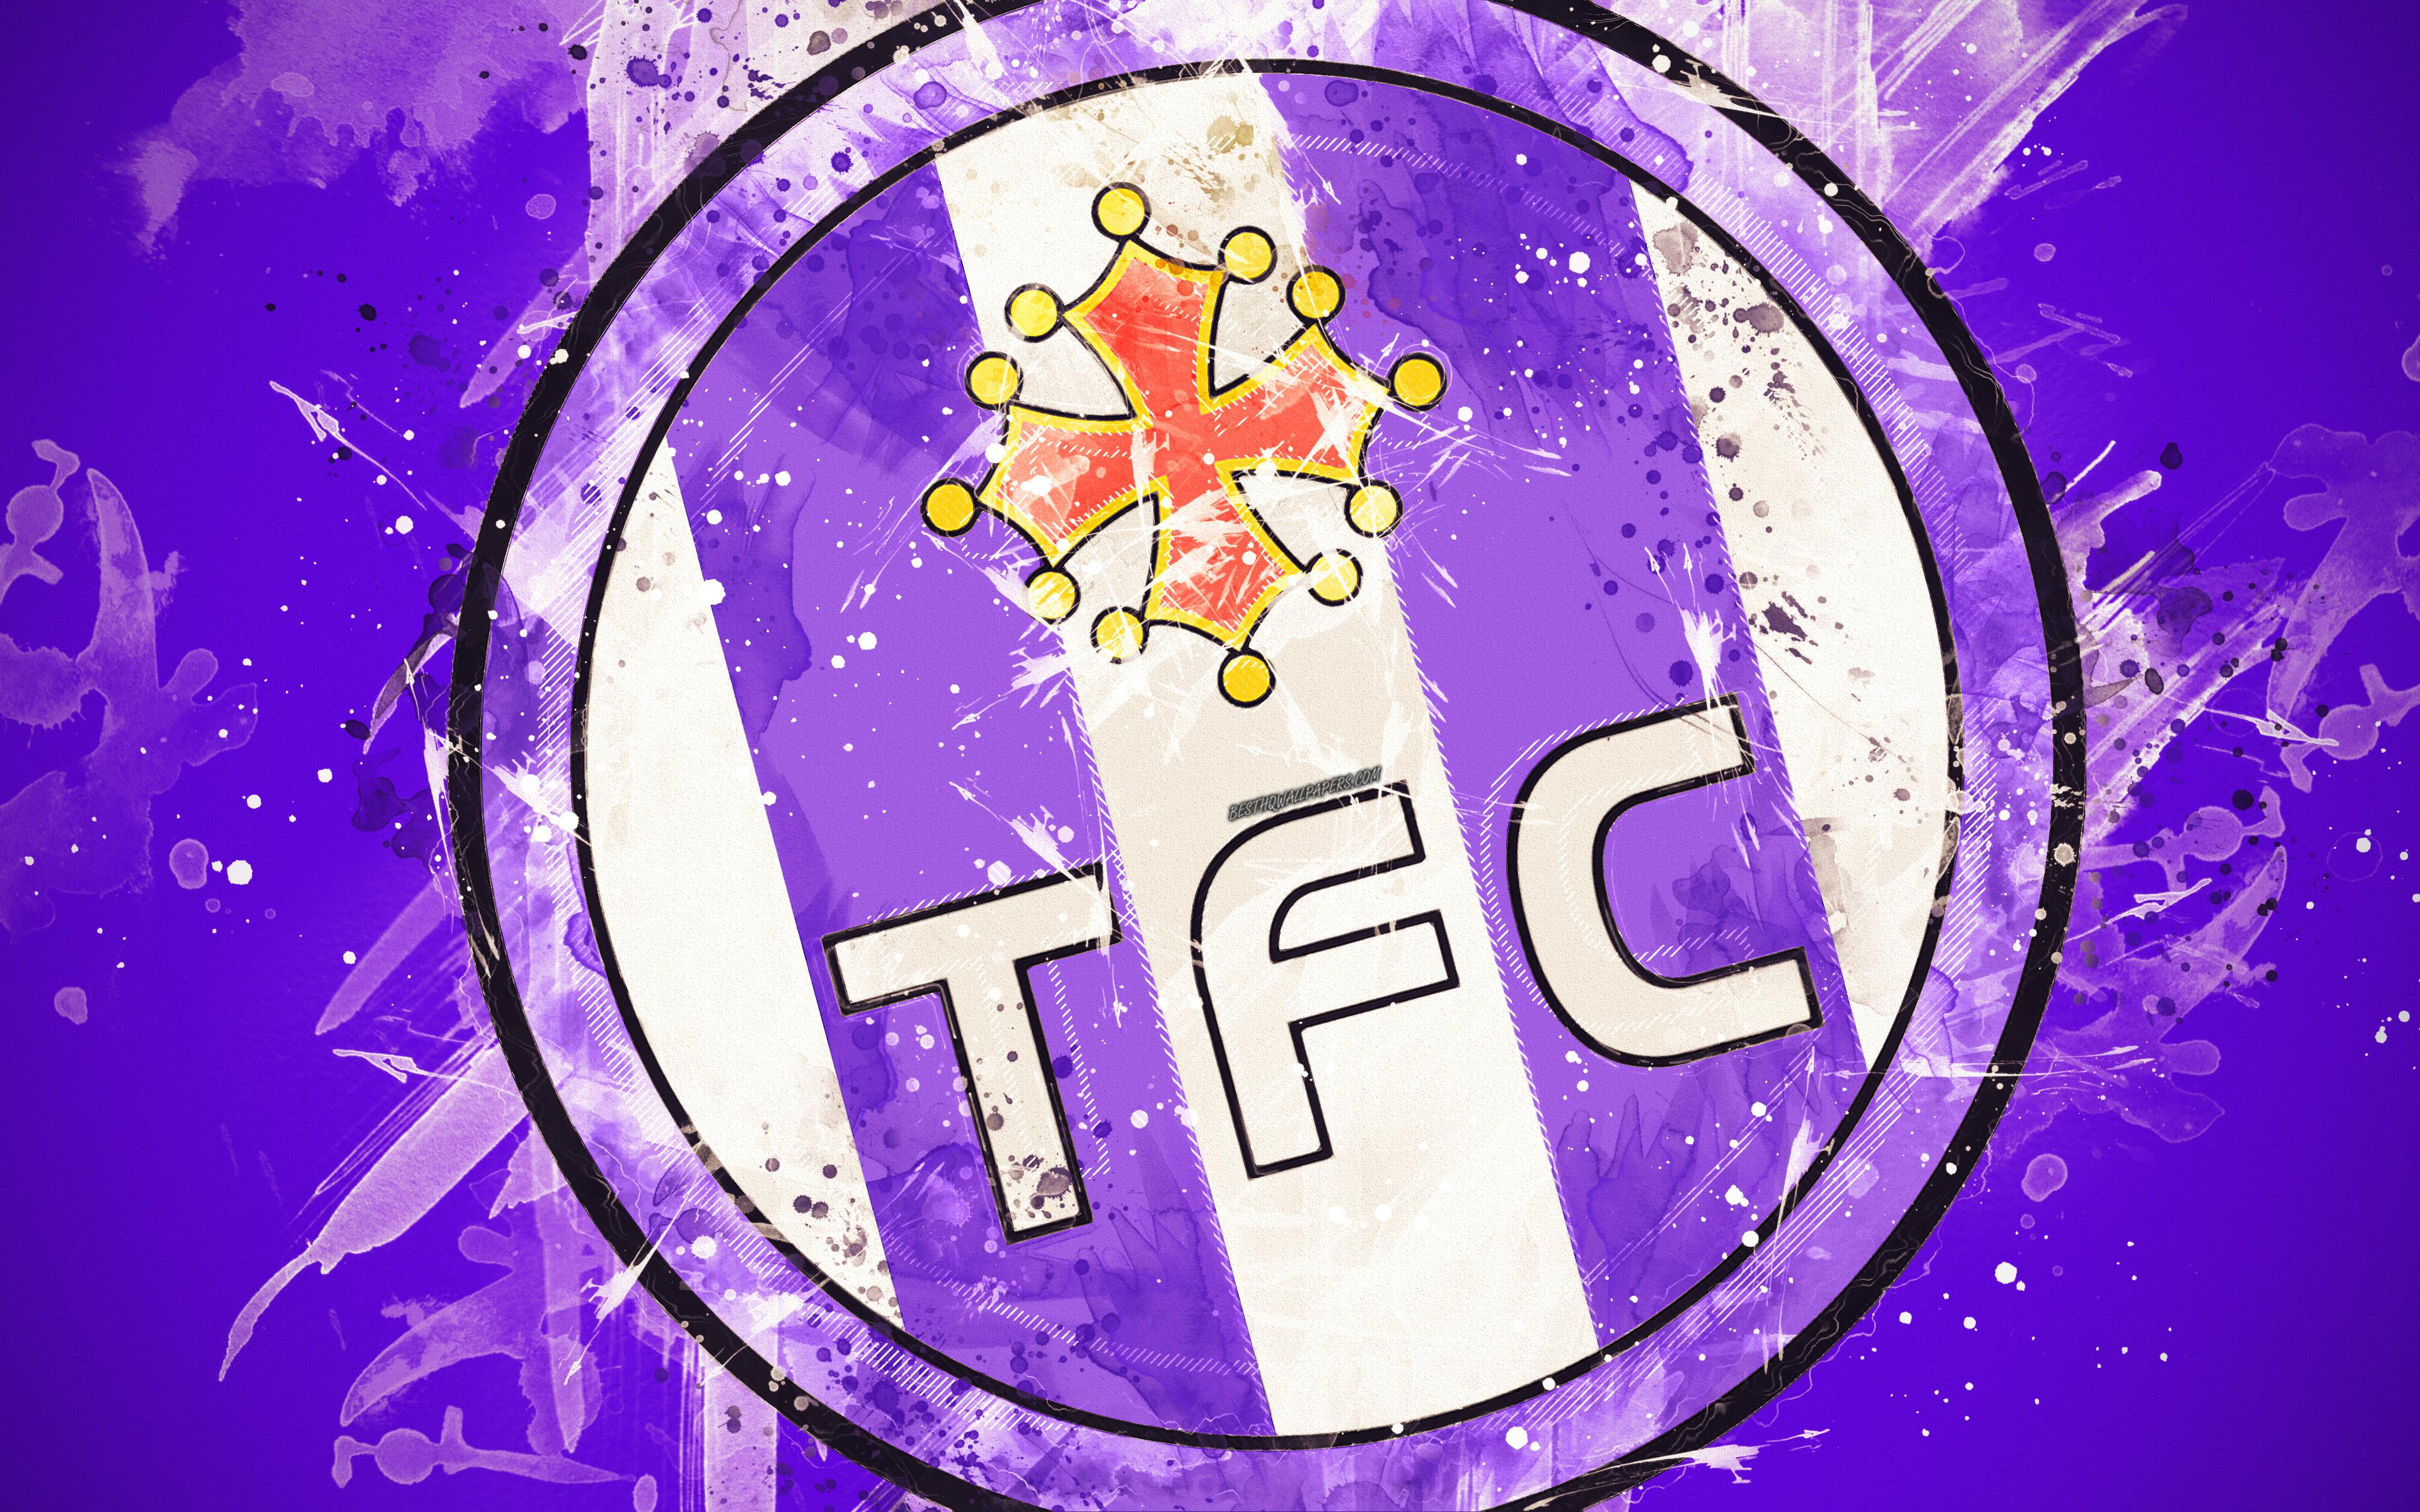 Download wallpaper Toulouse FC, 4k, paint art, creative, French